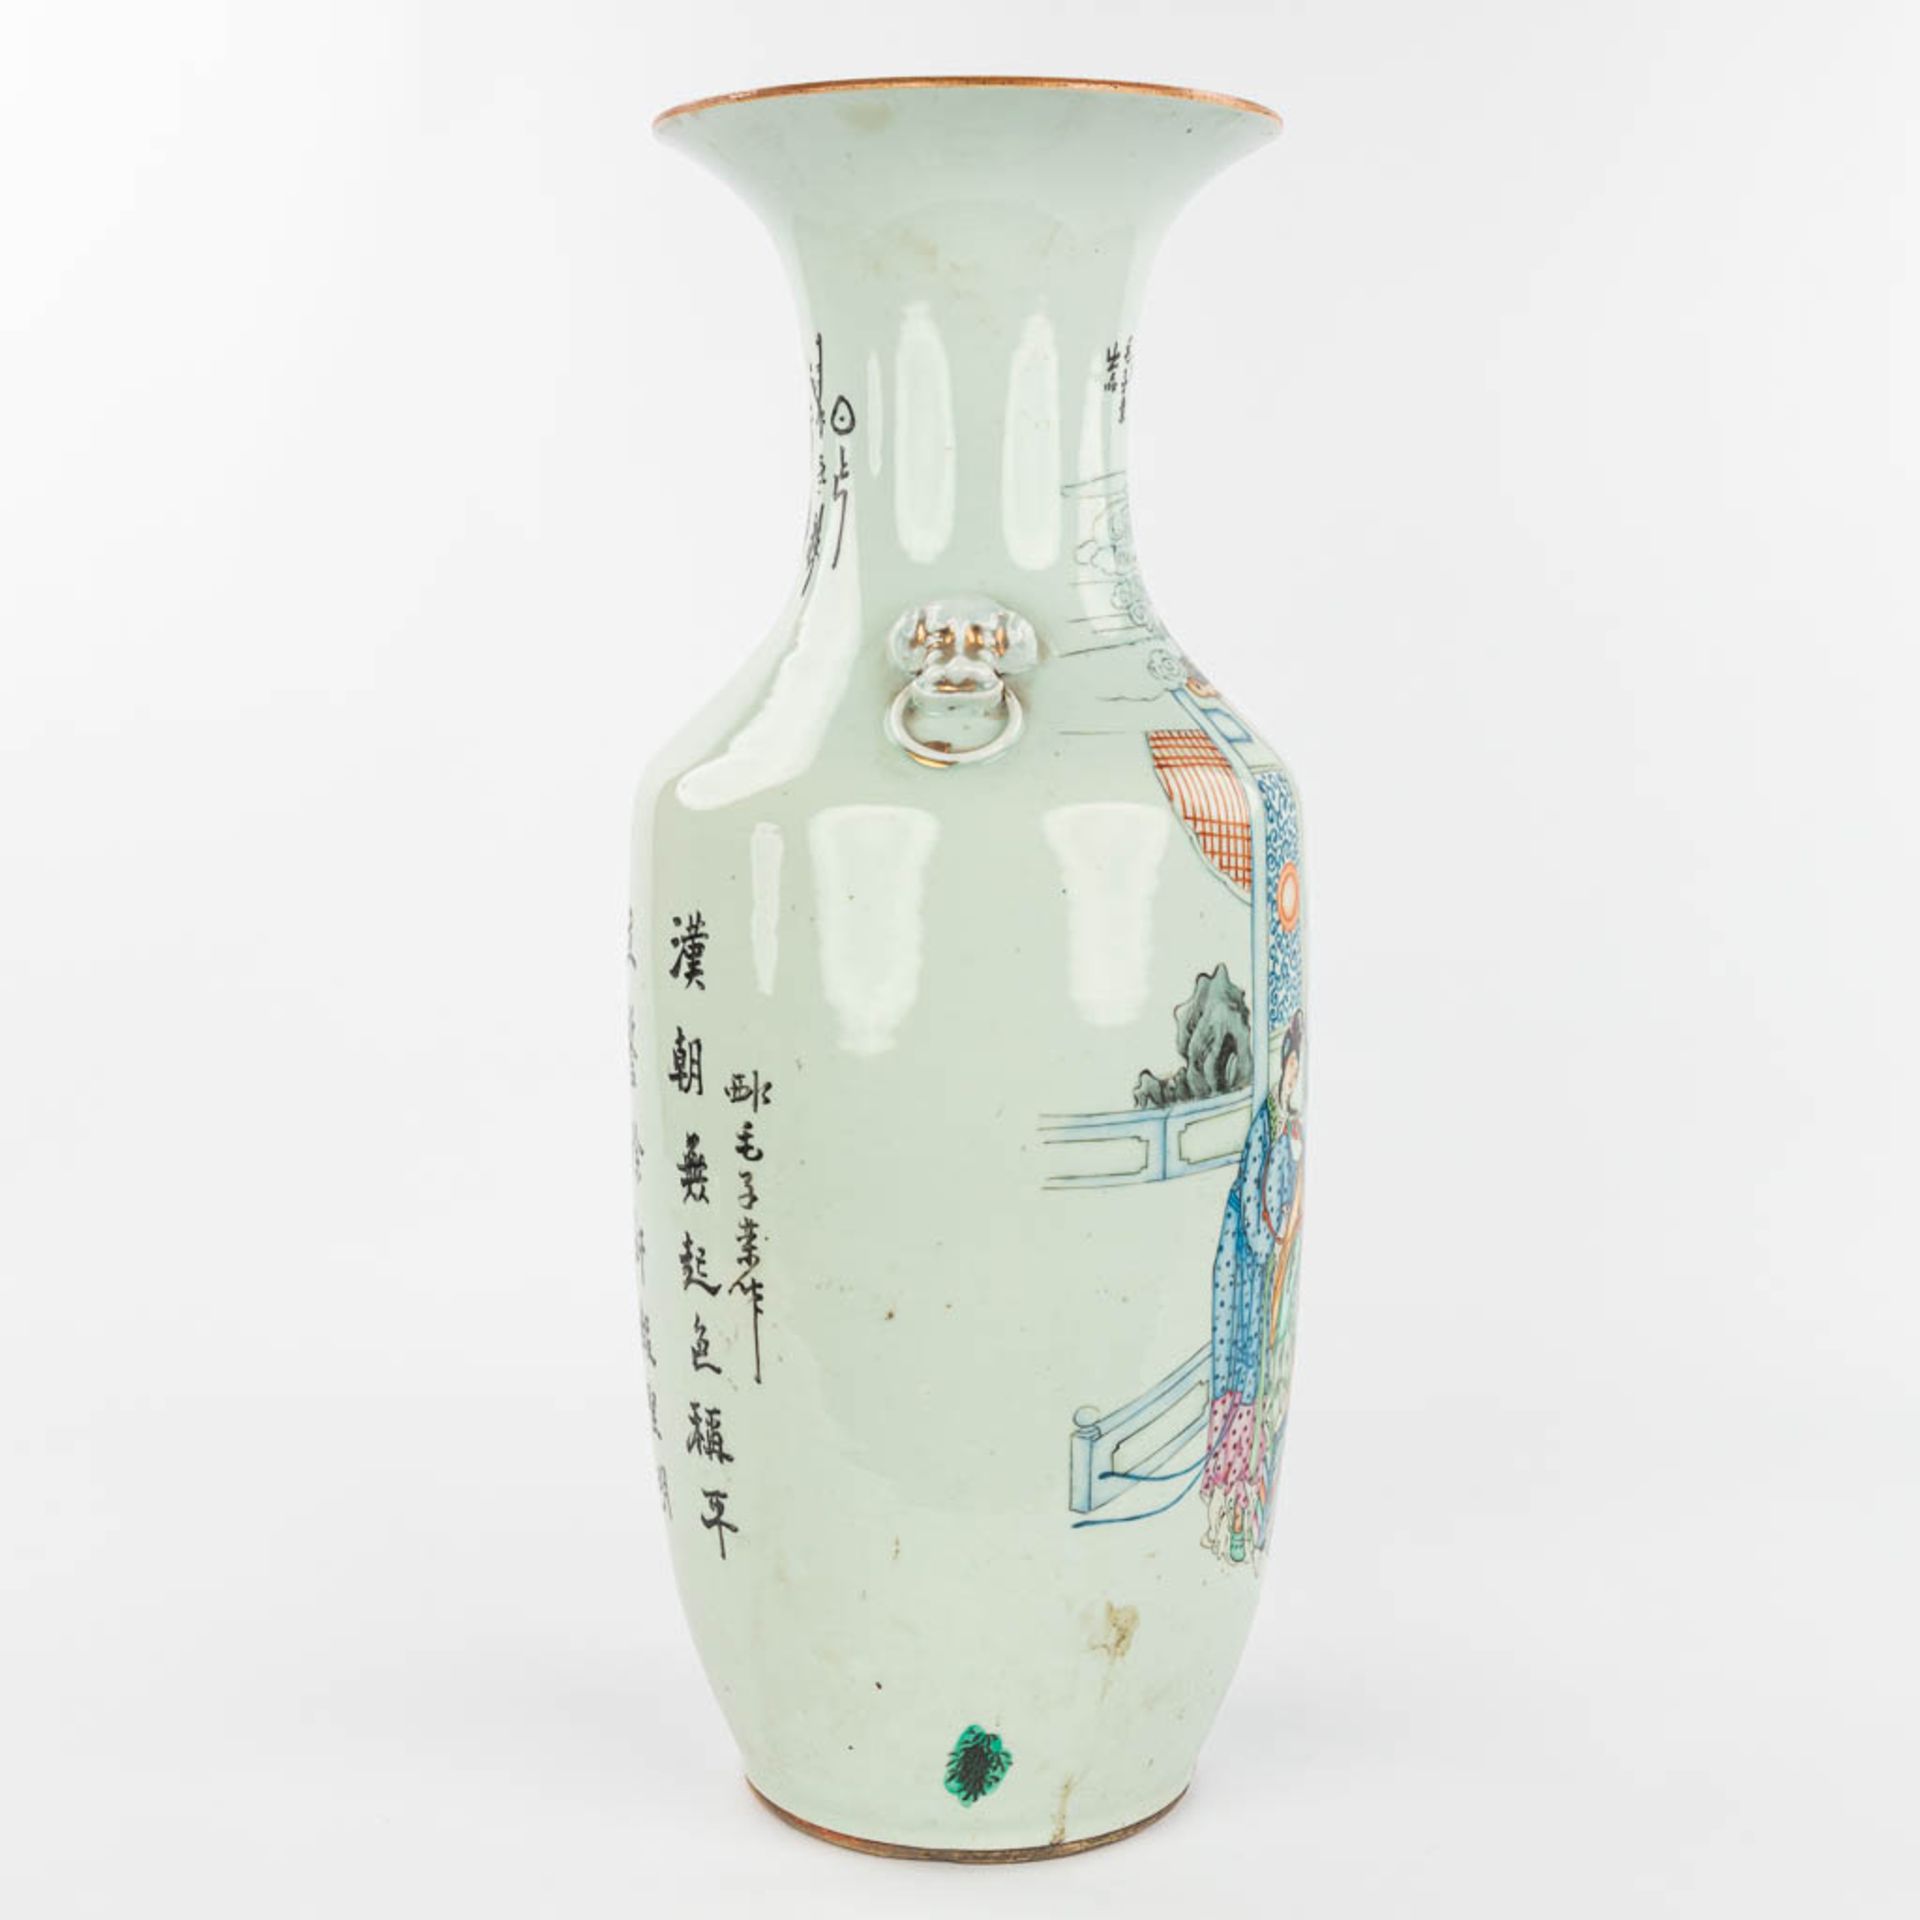 A Chinese vase made of porcelain and decorated with a temple scne and calligraphic texts. (H:57cm) - Image 2 of 12